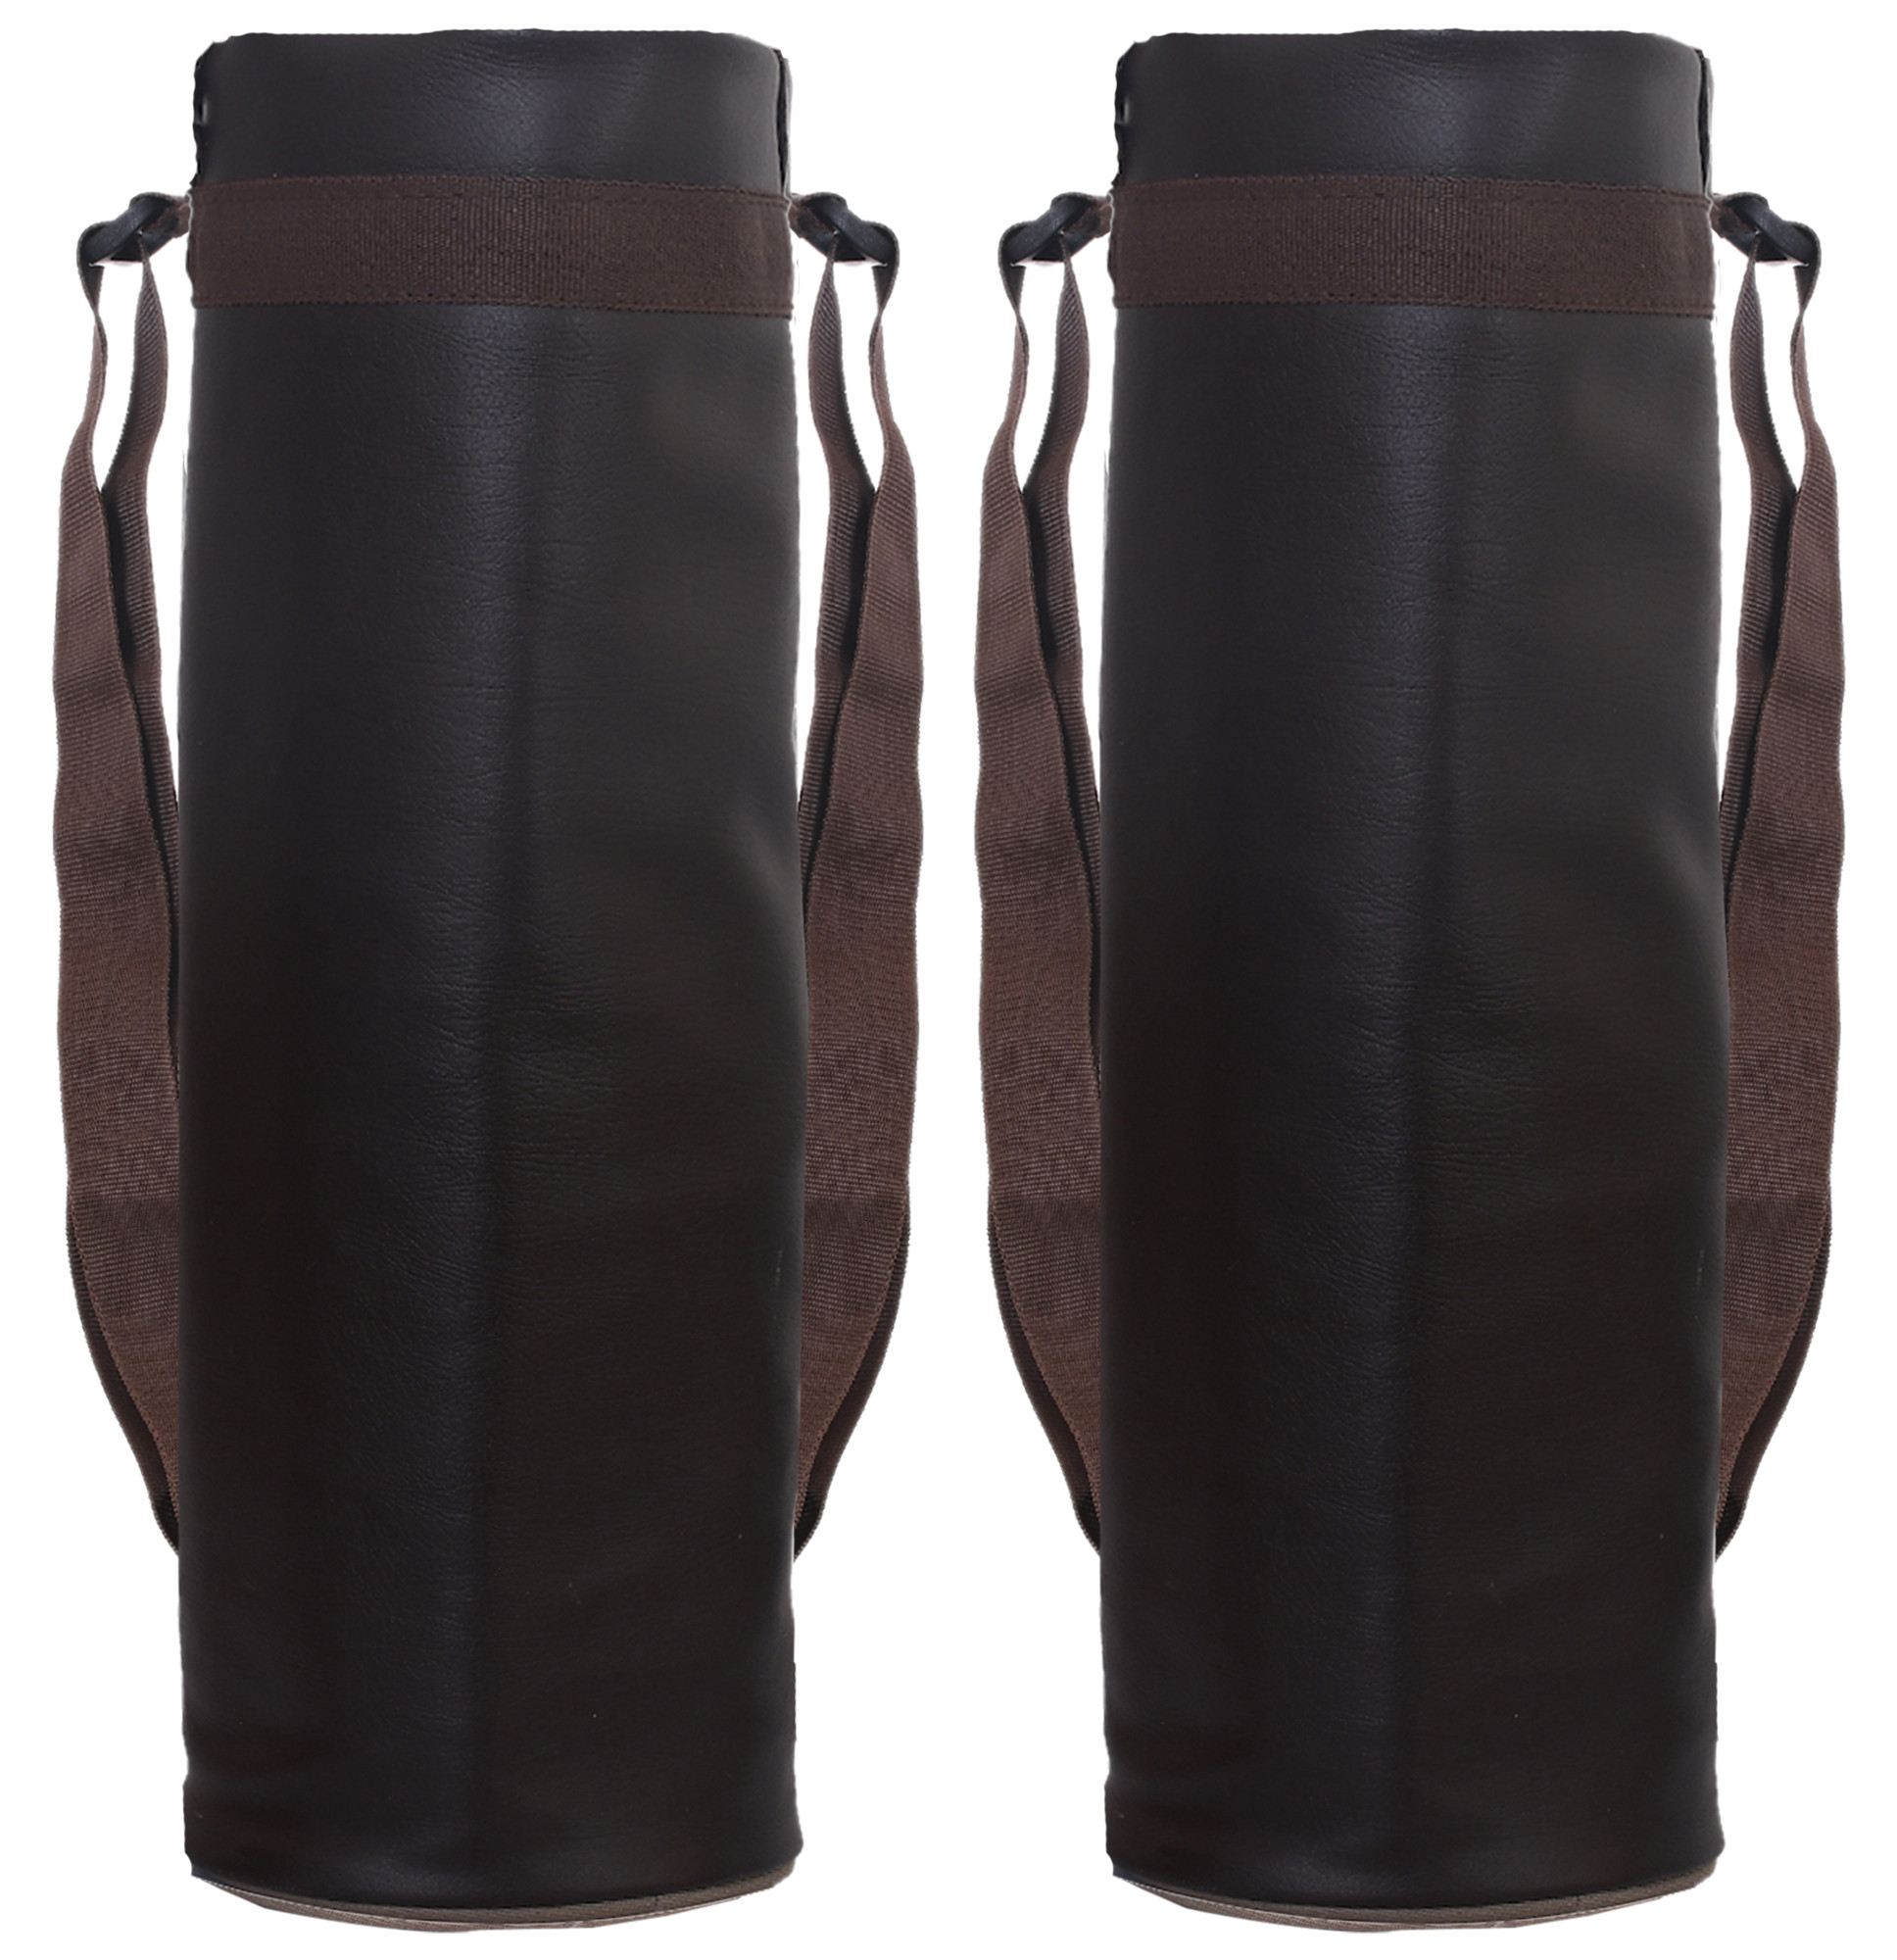 Kuber Industries Leather Insulated Round Water Bottle Cover/Bag,2.5 Ltr (Brown)